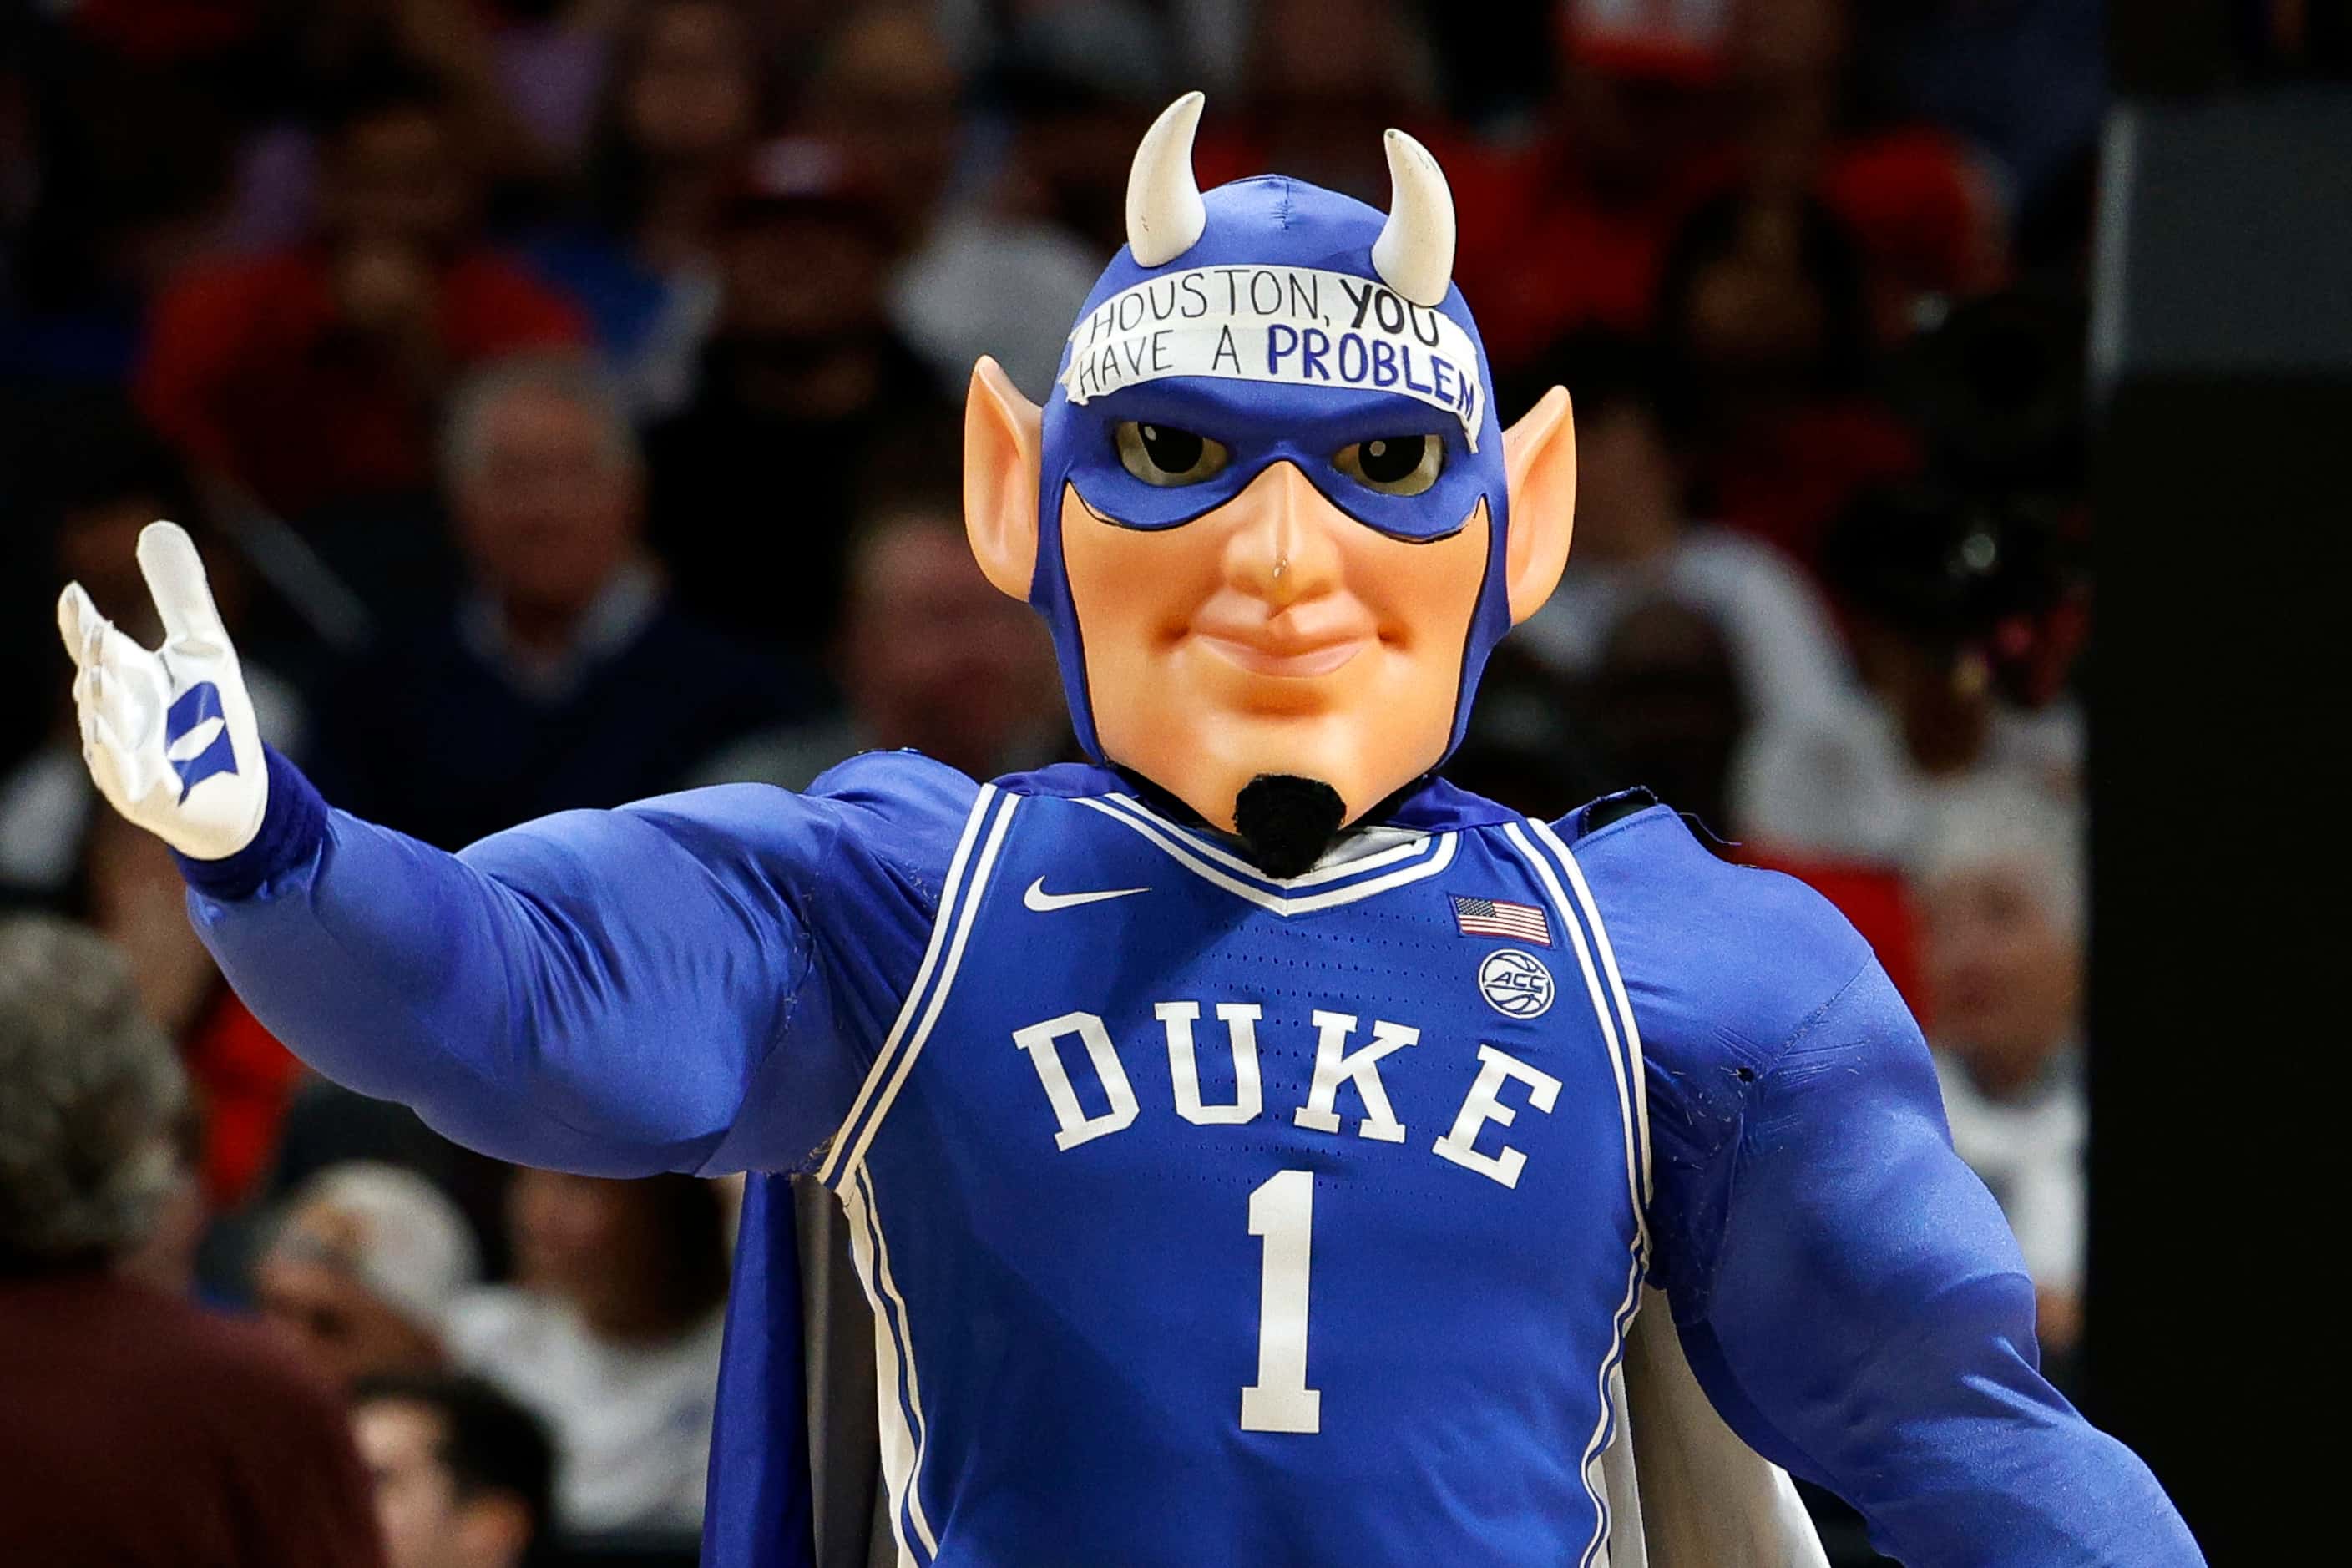 The Duke Blue Devil wears a piece of tape with “Houston, you have a problem” on its forehead...